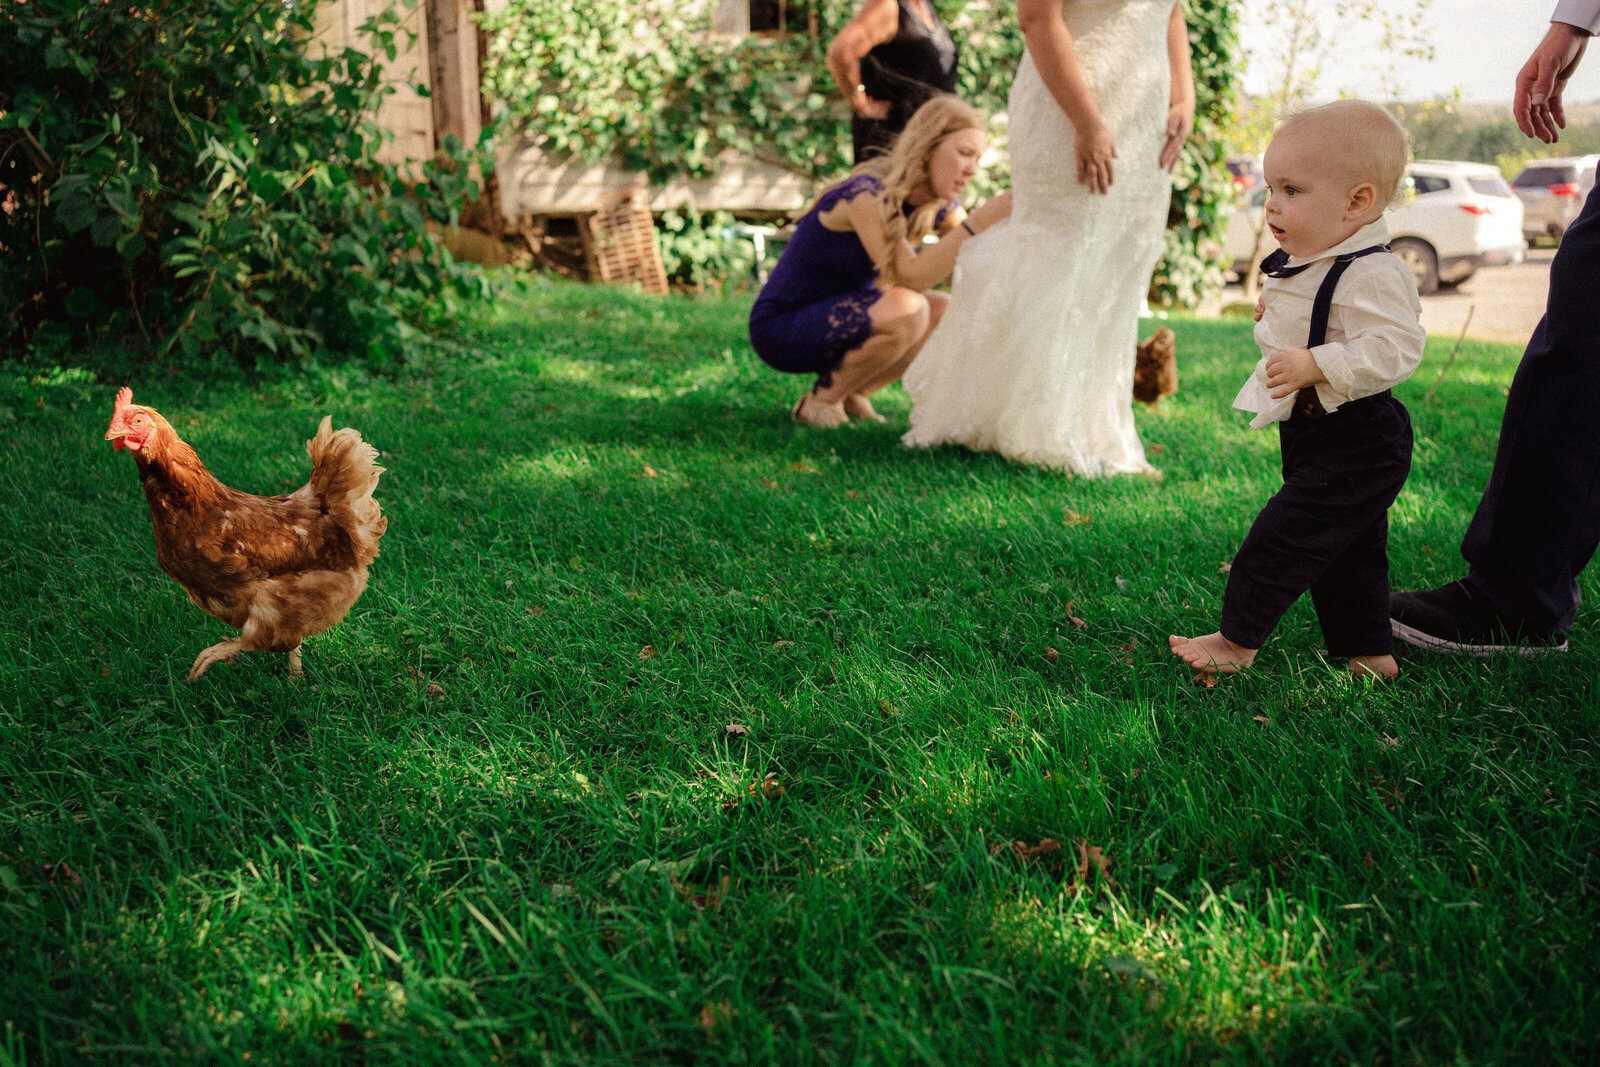 ringbearer chases a chicken while bride gets her train pinned up